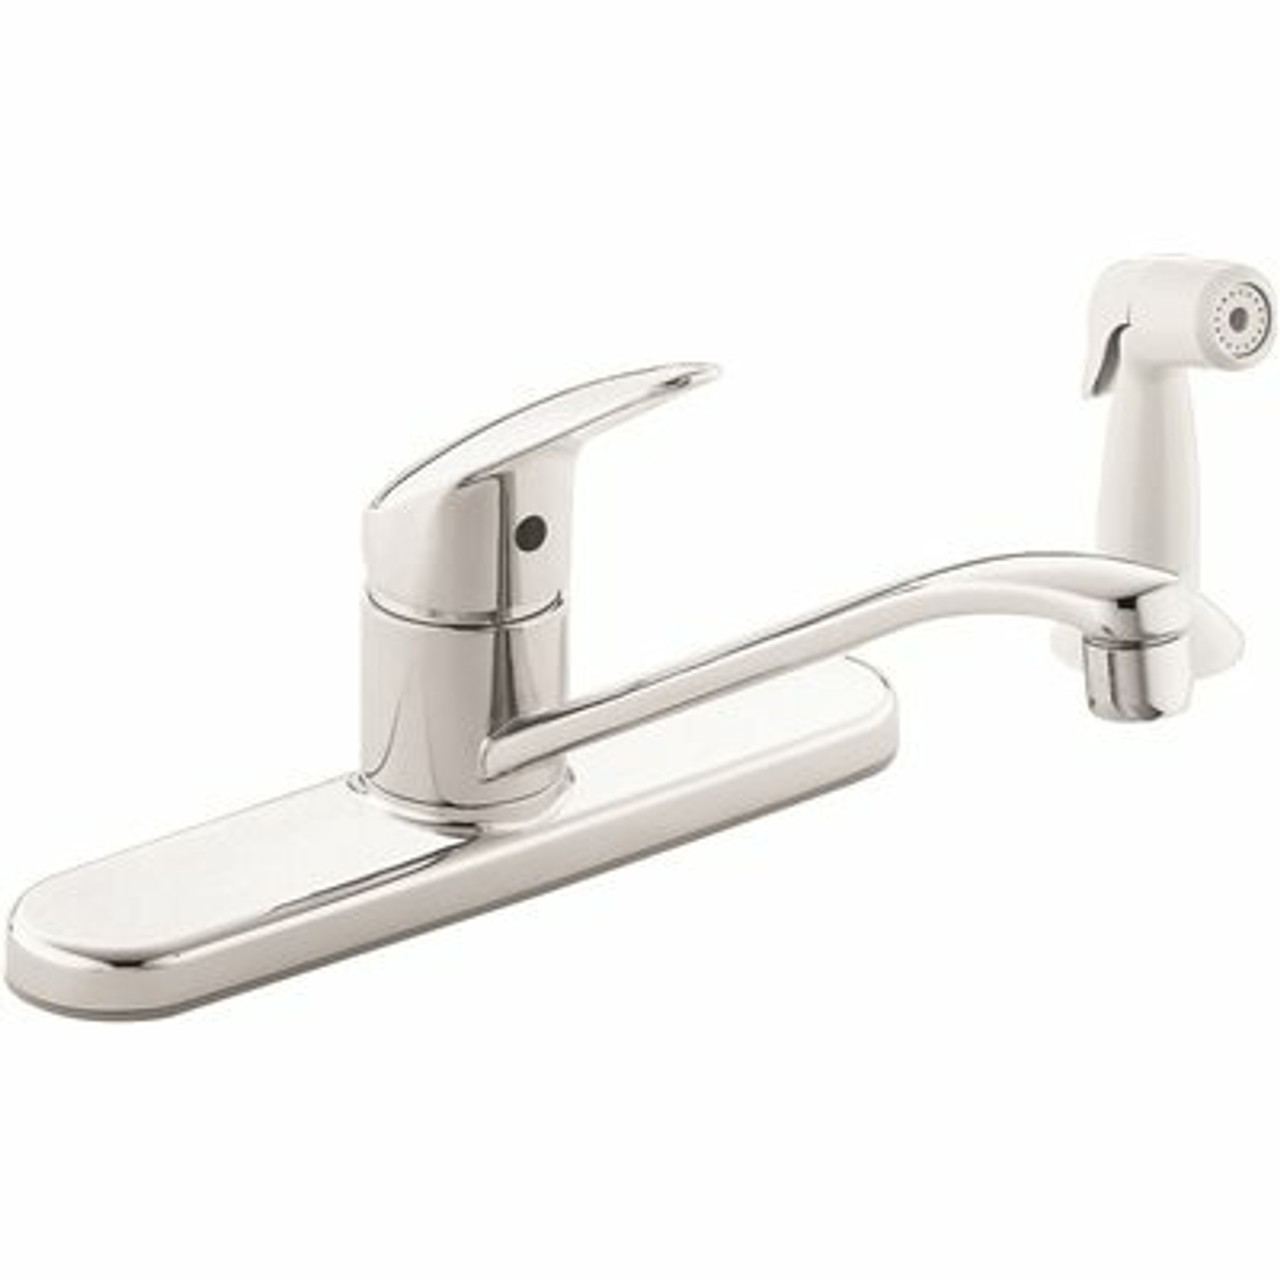 Cleveland Faucet Group Cornerstone Single-Handle Side Sprayer Kitchen Faucet In Chrome - 561081Lf